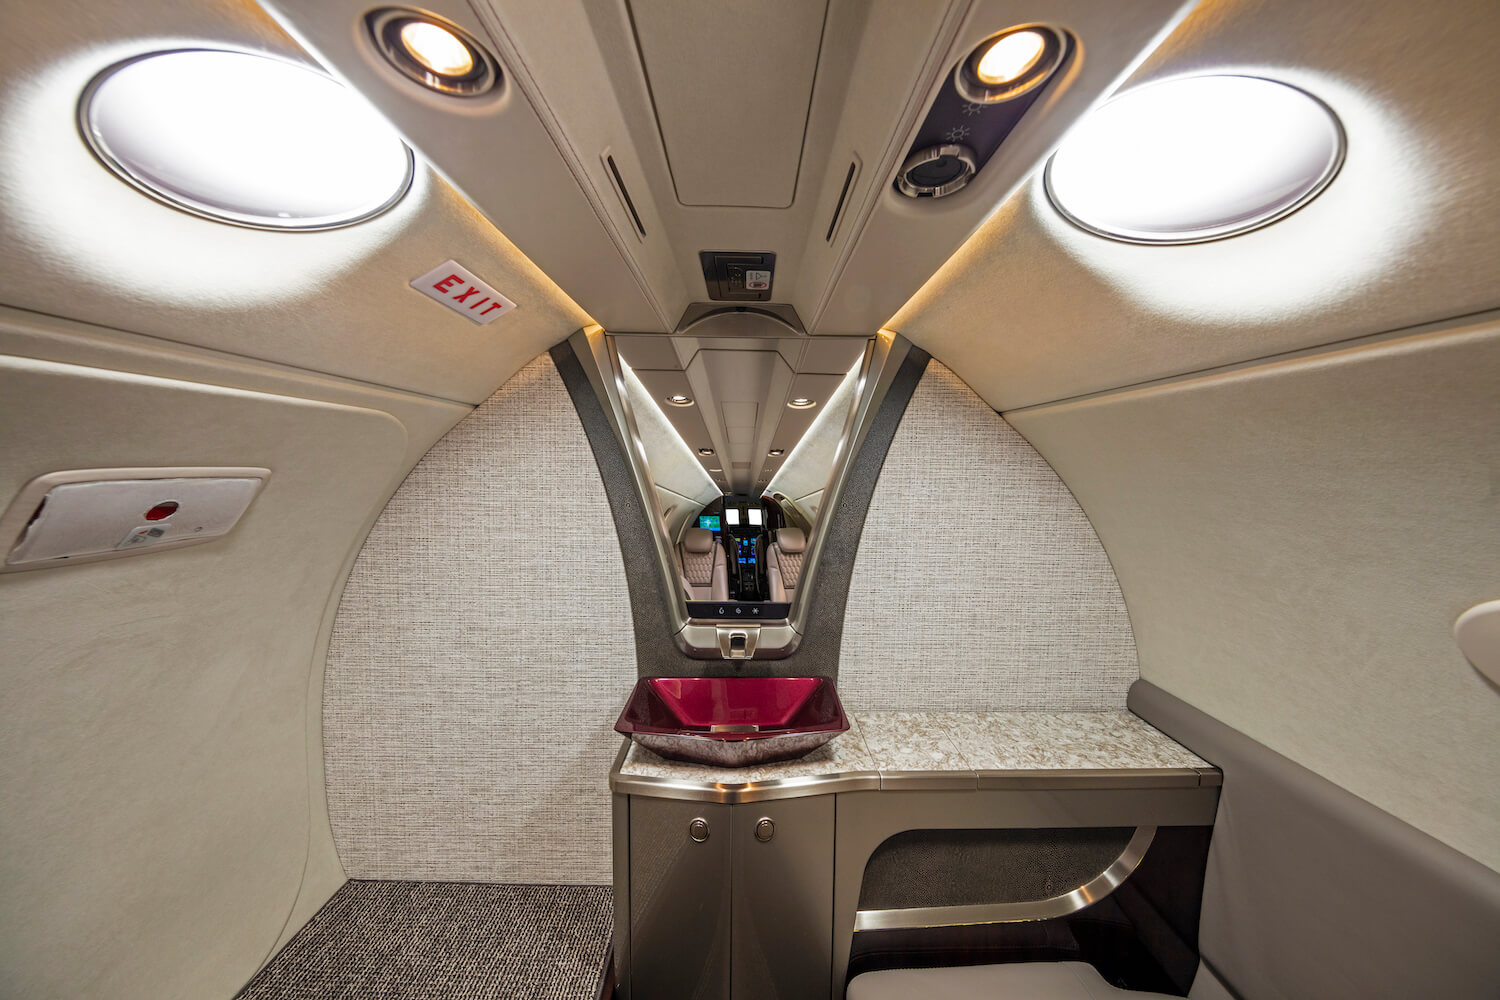 The-Cessna-Citation-CJ4-Gen2-bathroom,-with-light-gray-upholstery,-red-sink,-mirror-above-the-vanity-and-set-of-skylights. 